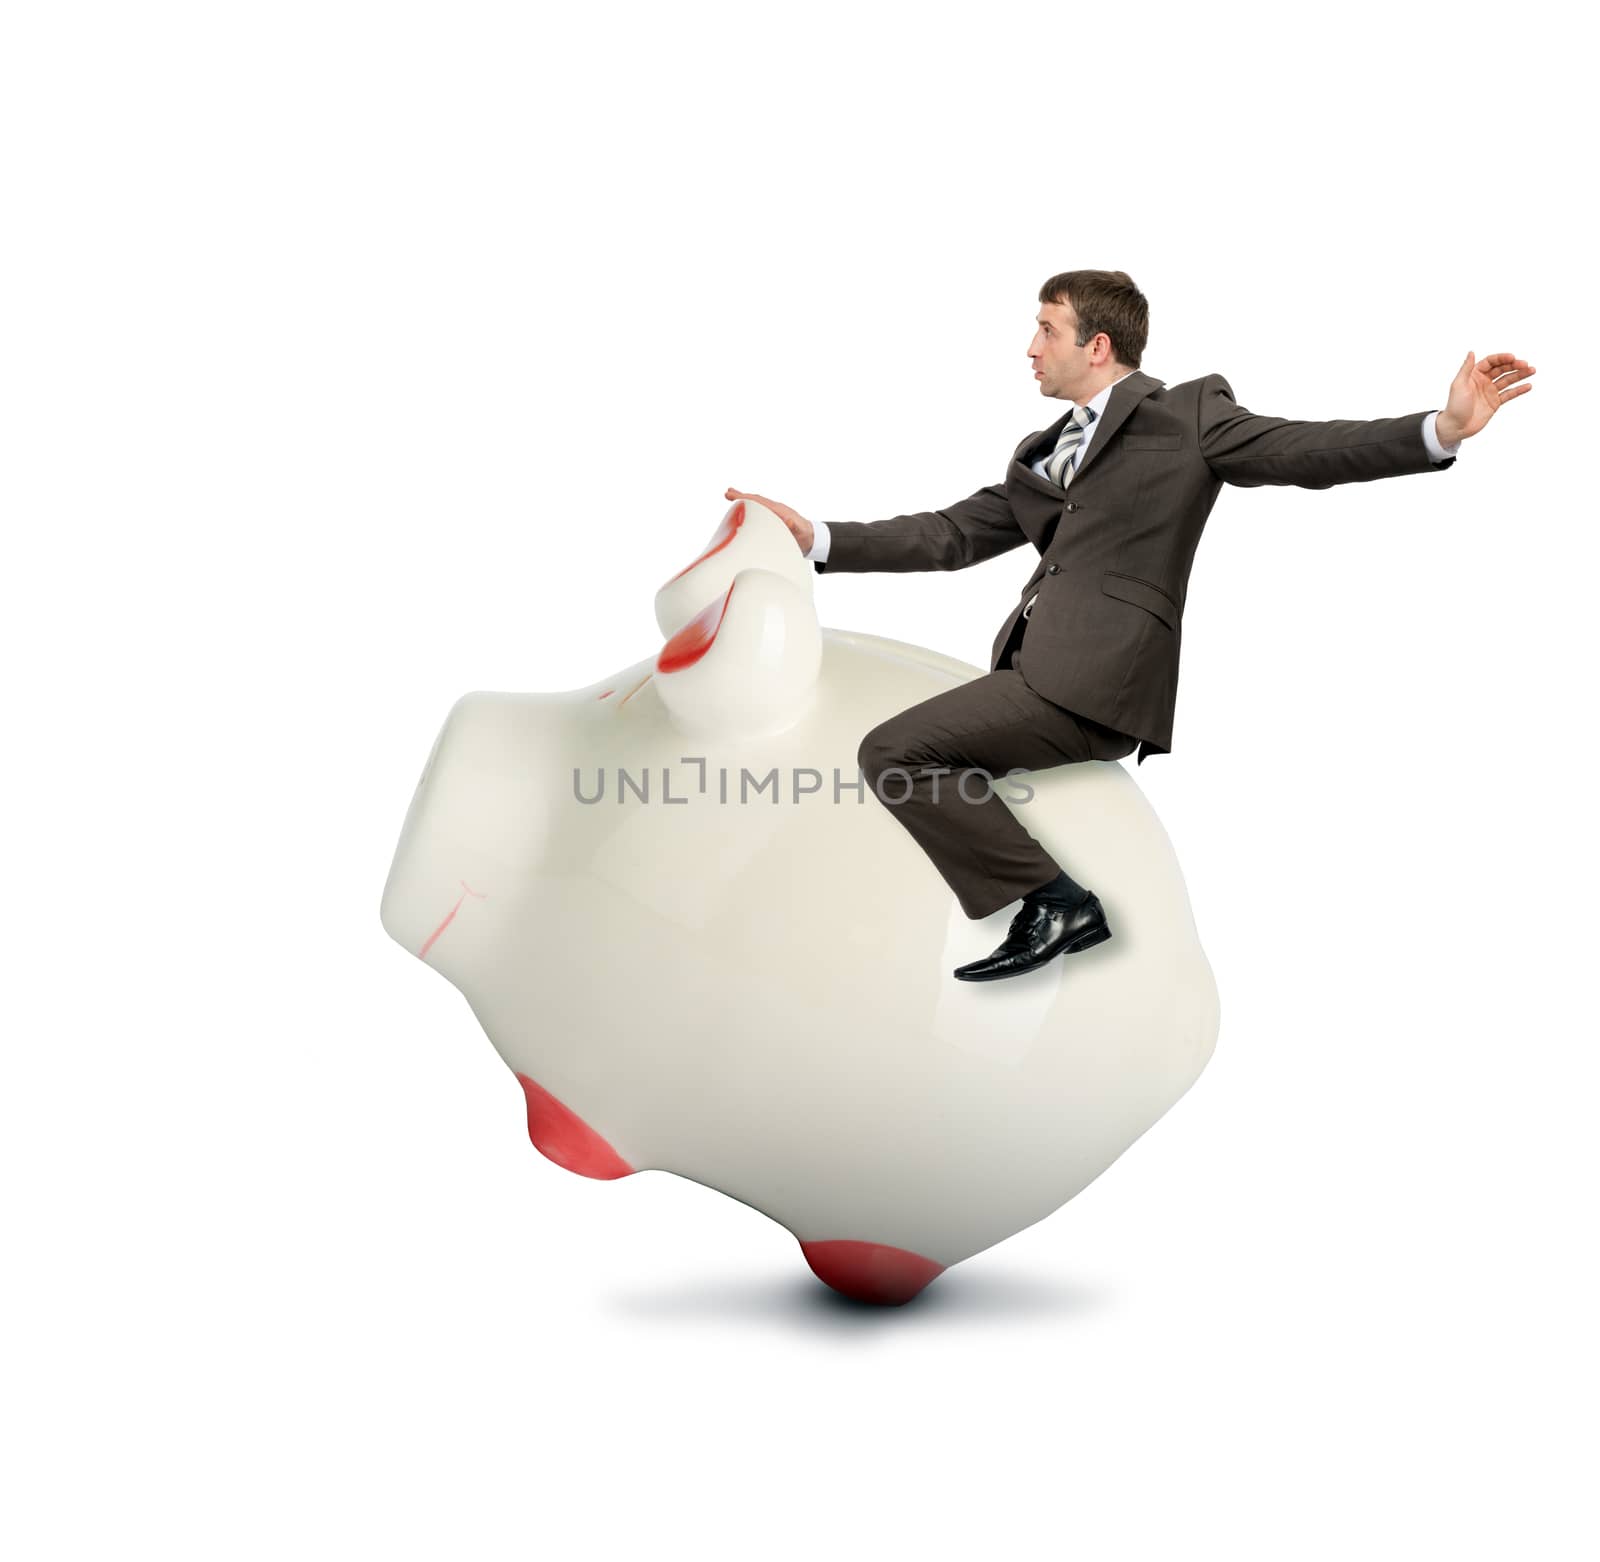 Businessman riding piggy bank isolated on white background, business concept